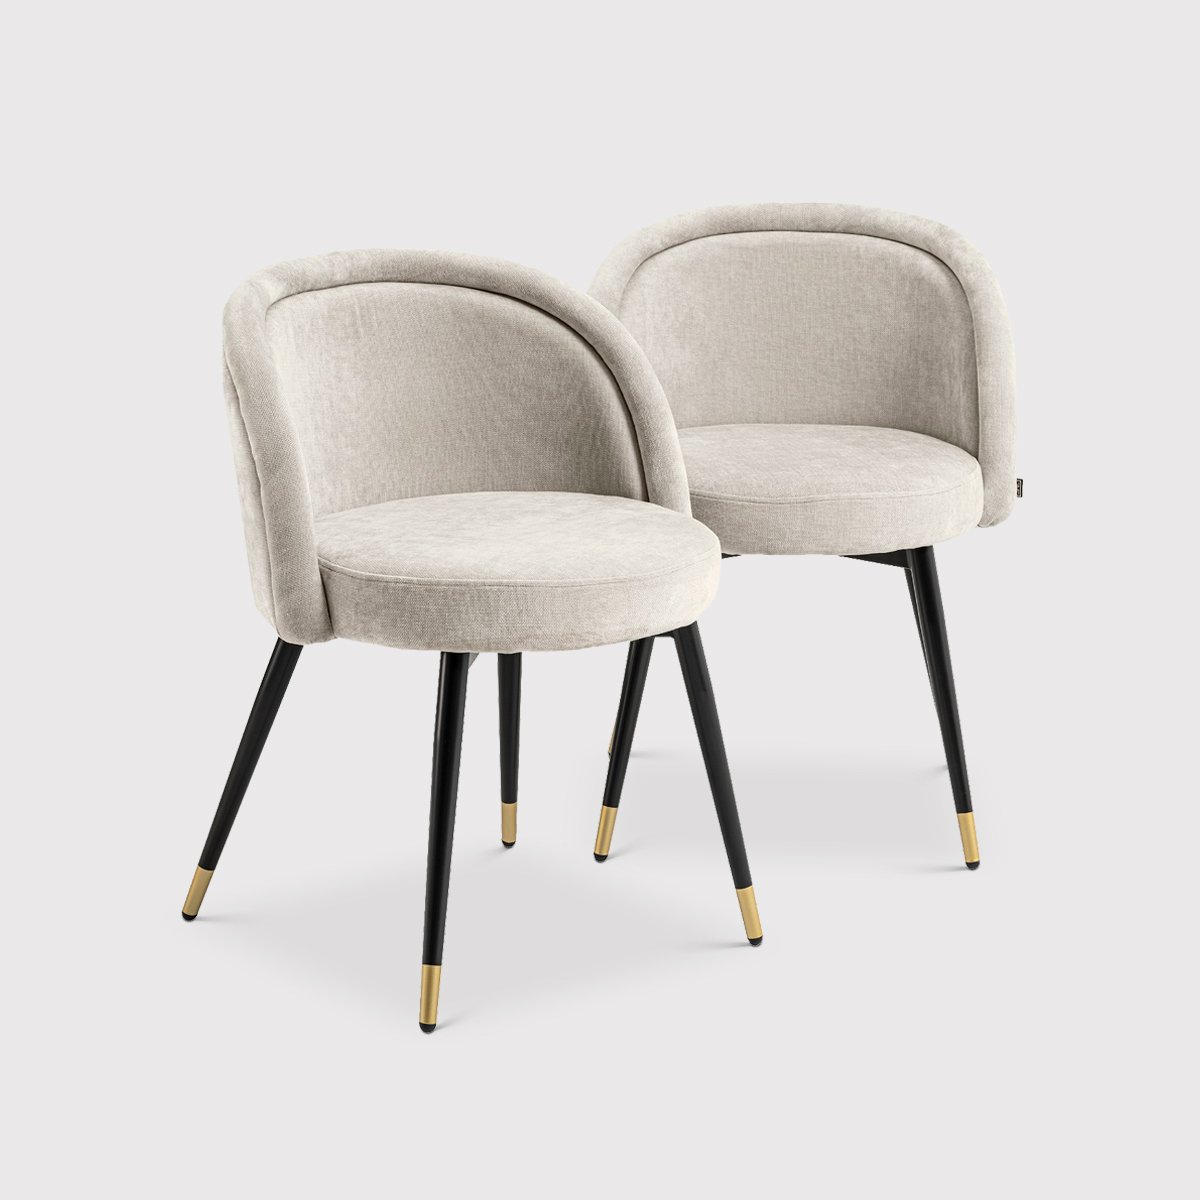 Eichholtz Chloe Set of 2 Dining Chairs, Neutral | Barker & Stonehouse